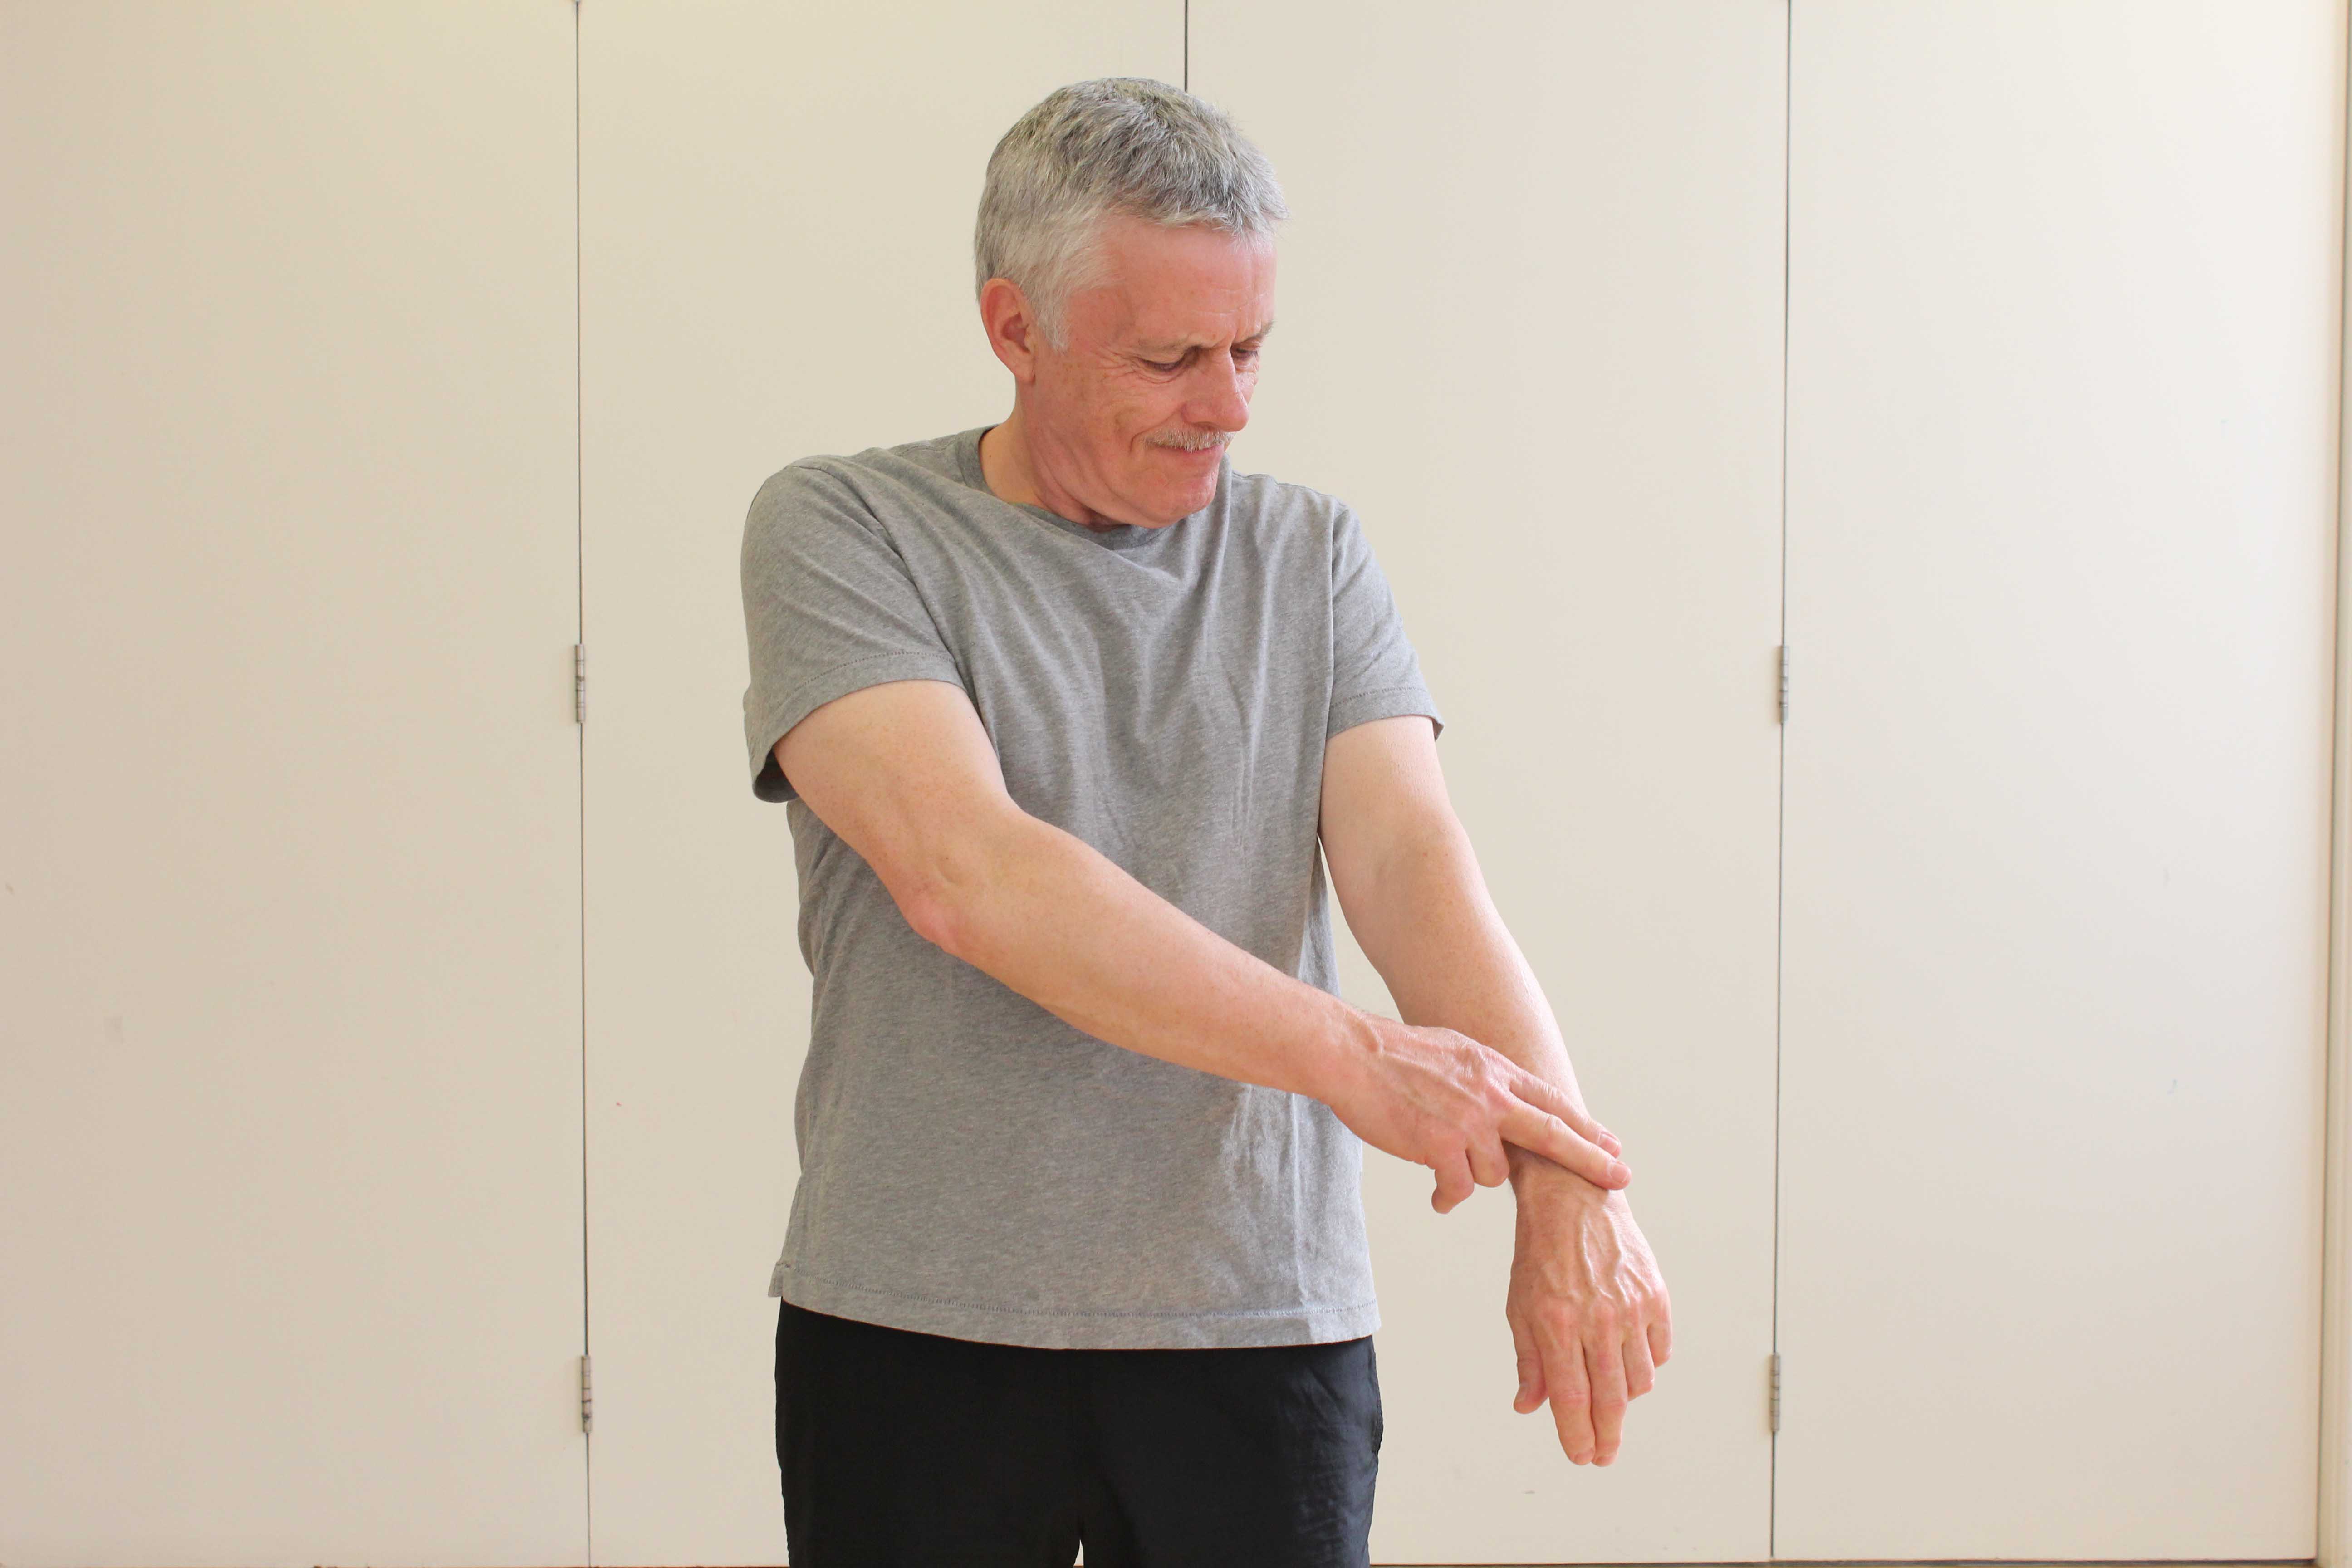 If you suspect you may have injured your wrist, book in to see one of our physiotherapists.